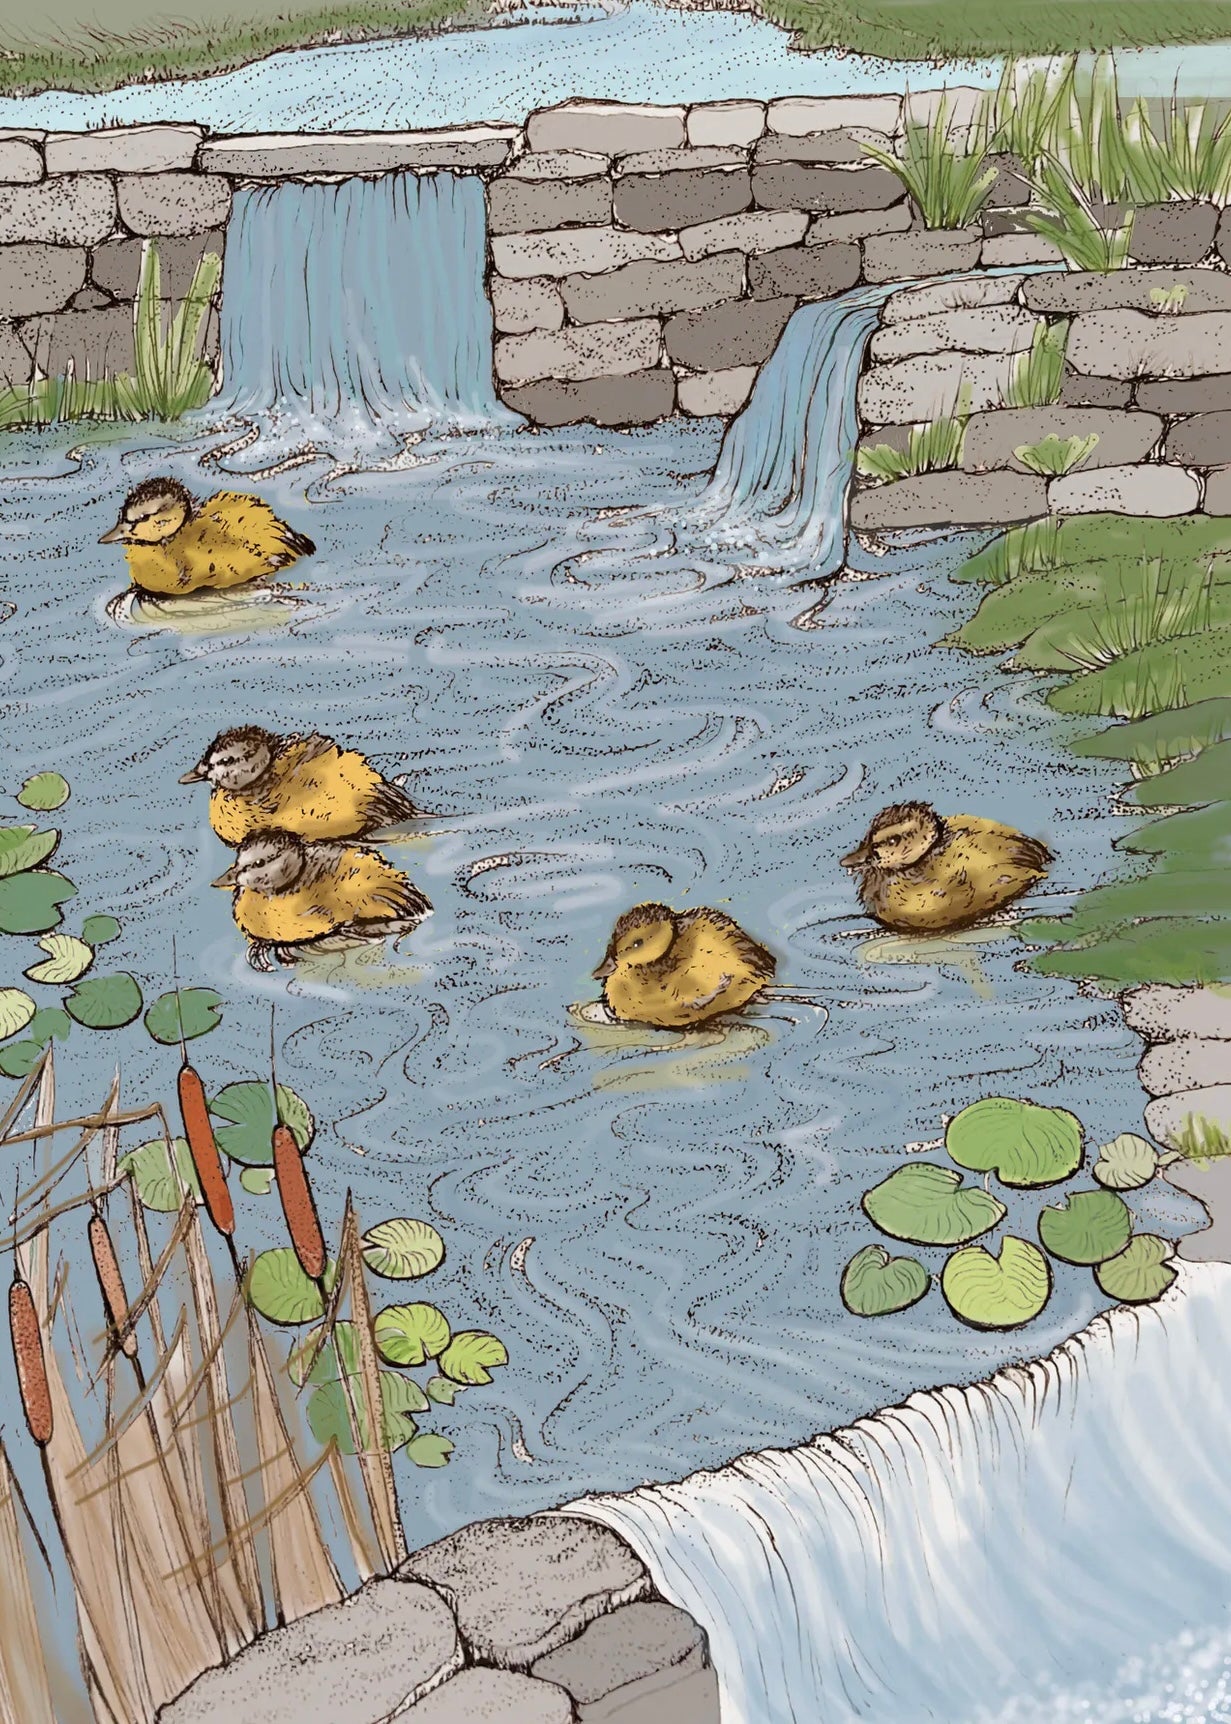 Fay's Studio Ducklings on a Pond